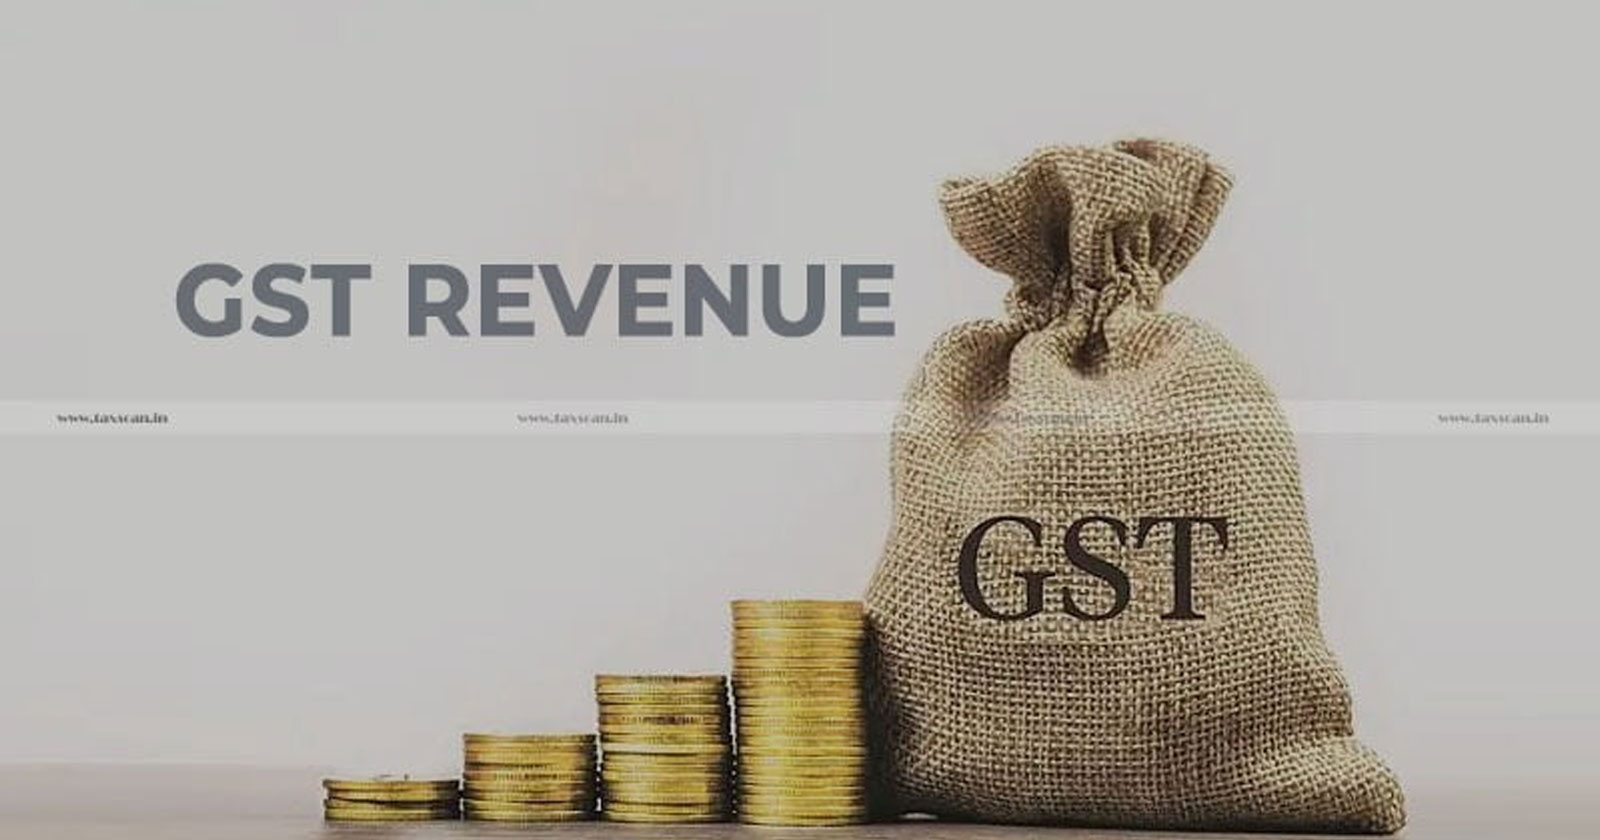 Highest Growth Rate - GST Revenue - GST Revenue Collection - YoY Increase - taxscan